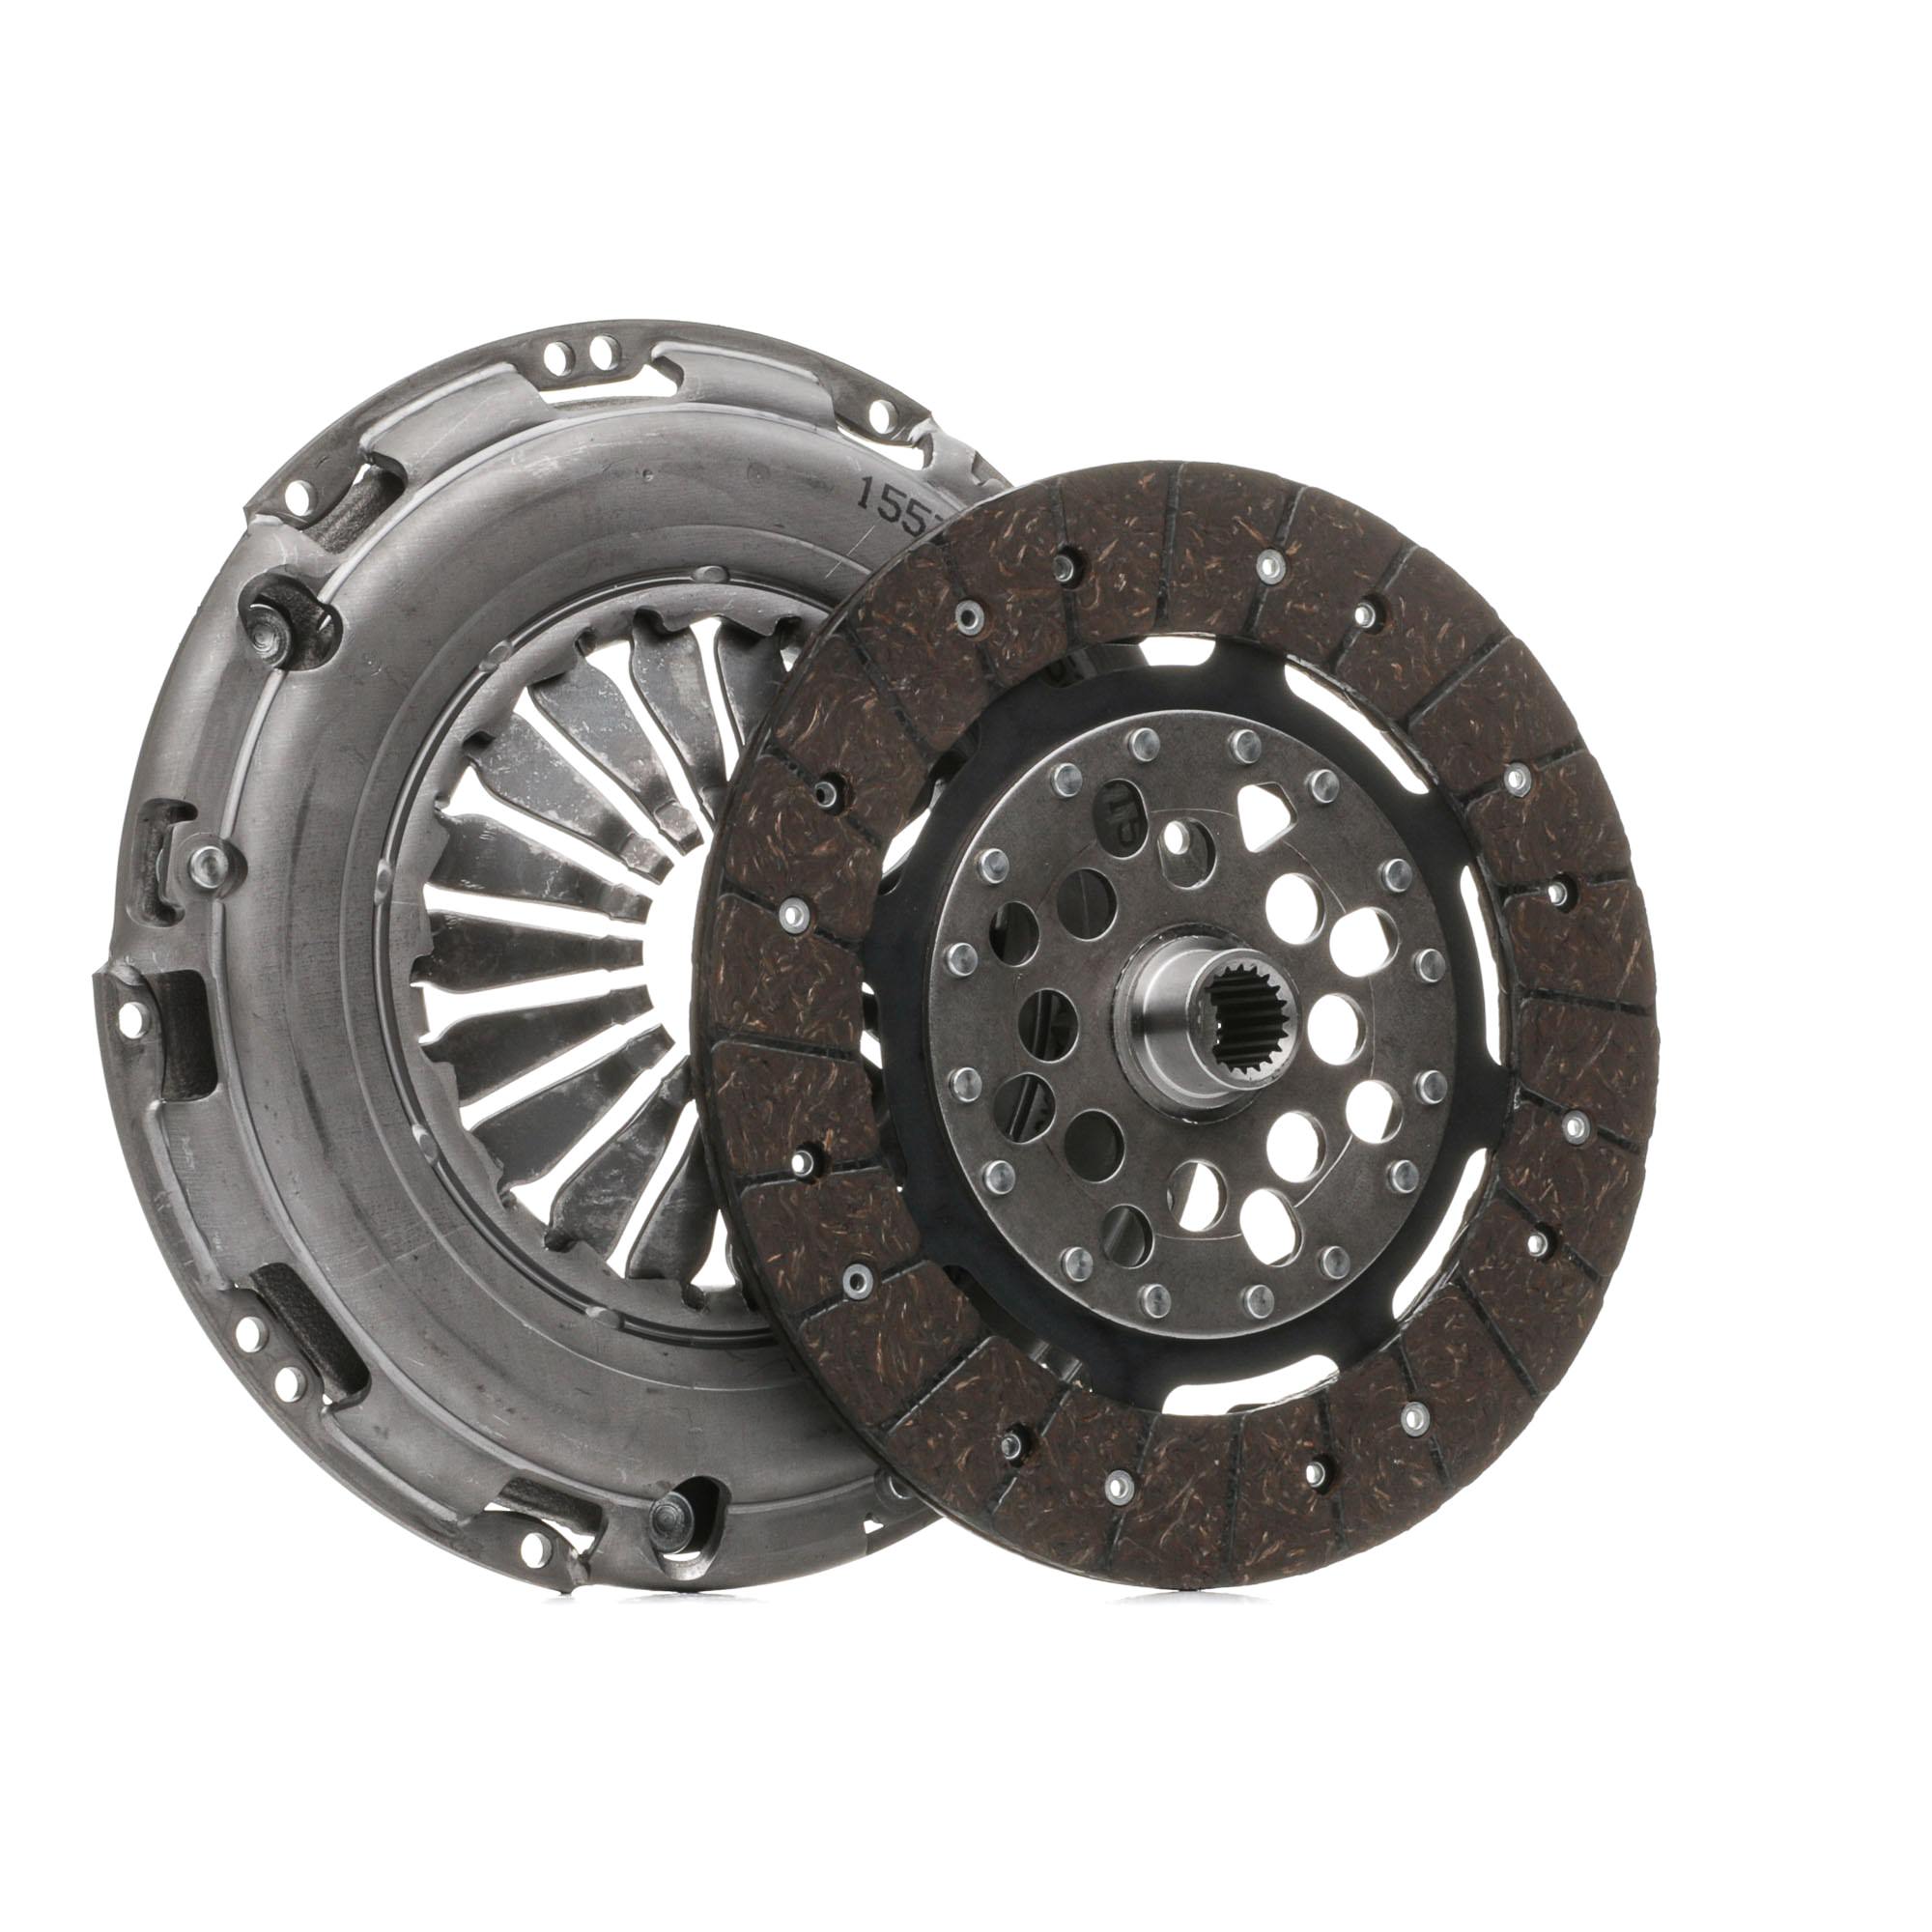 479C0446 RIDEX Clutch set VOLVO two-piece, with clutch pressure plate, with clutch disc, without clutch release bearing, 226mm